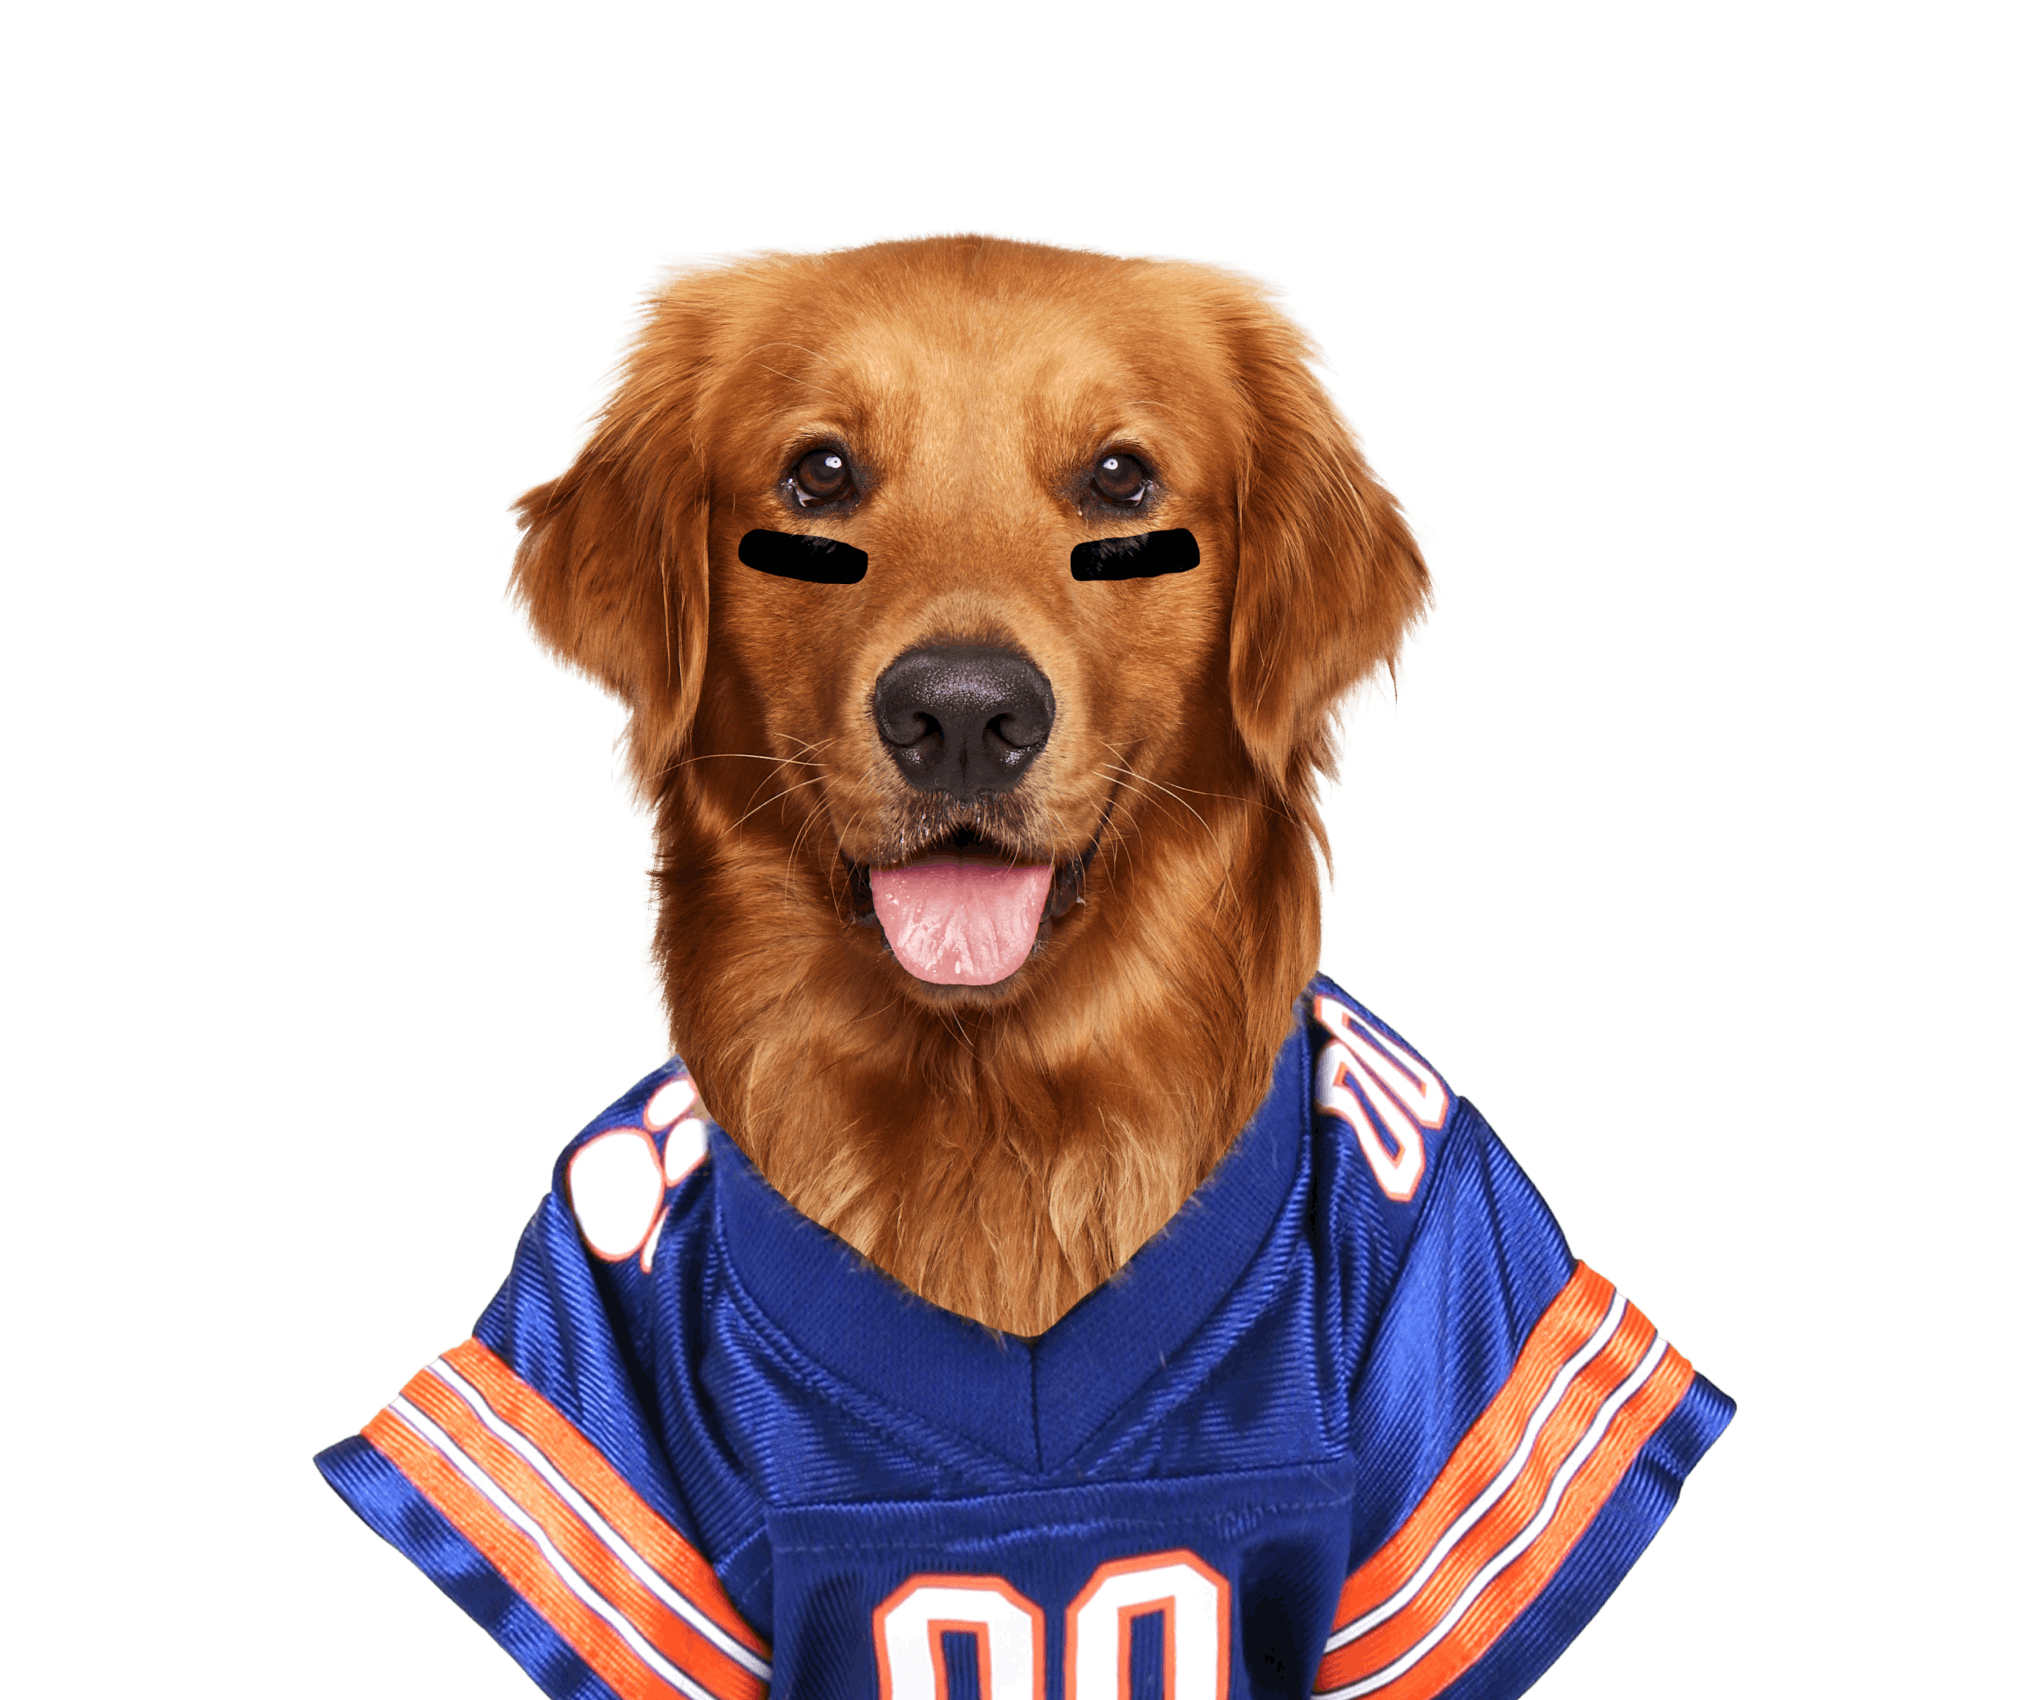 Cute Golden Retriever puppy smiling and wearing football jersey